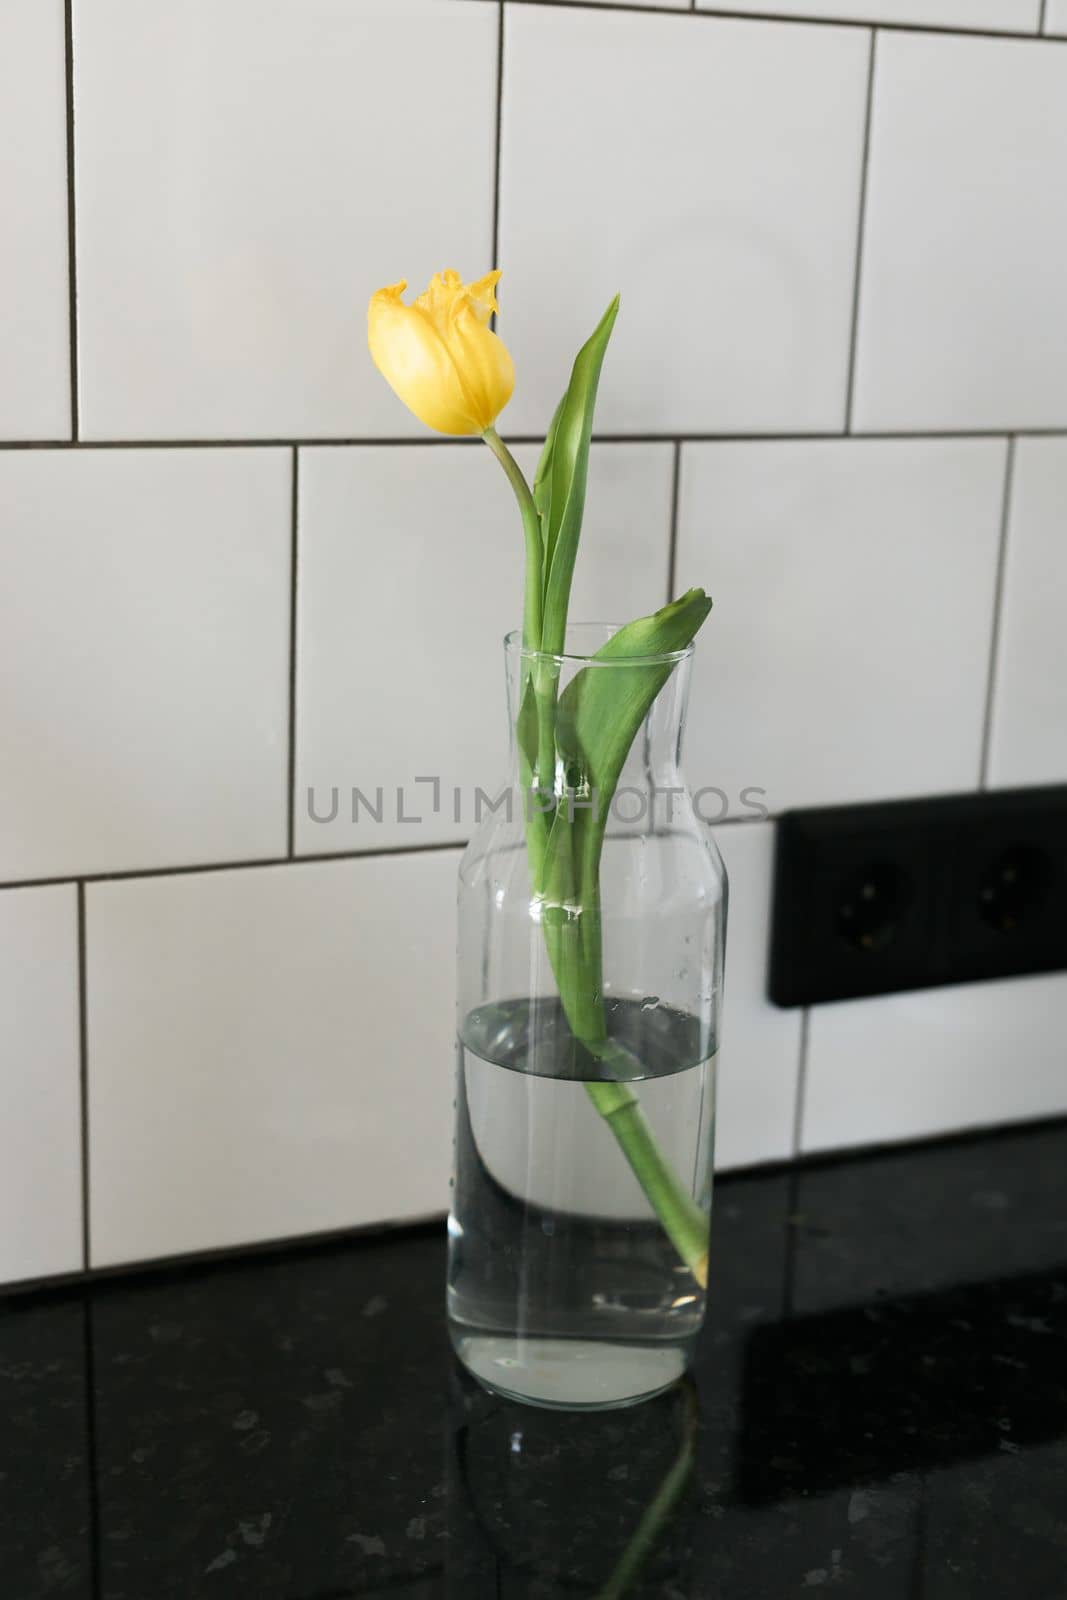 One yellow tulip flower in glass vase indoors - springtime and gift or present by Satura86